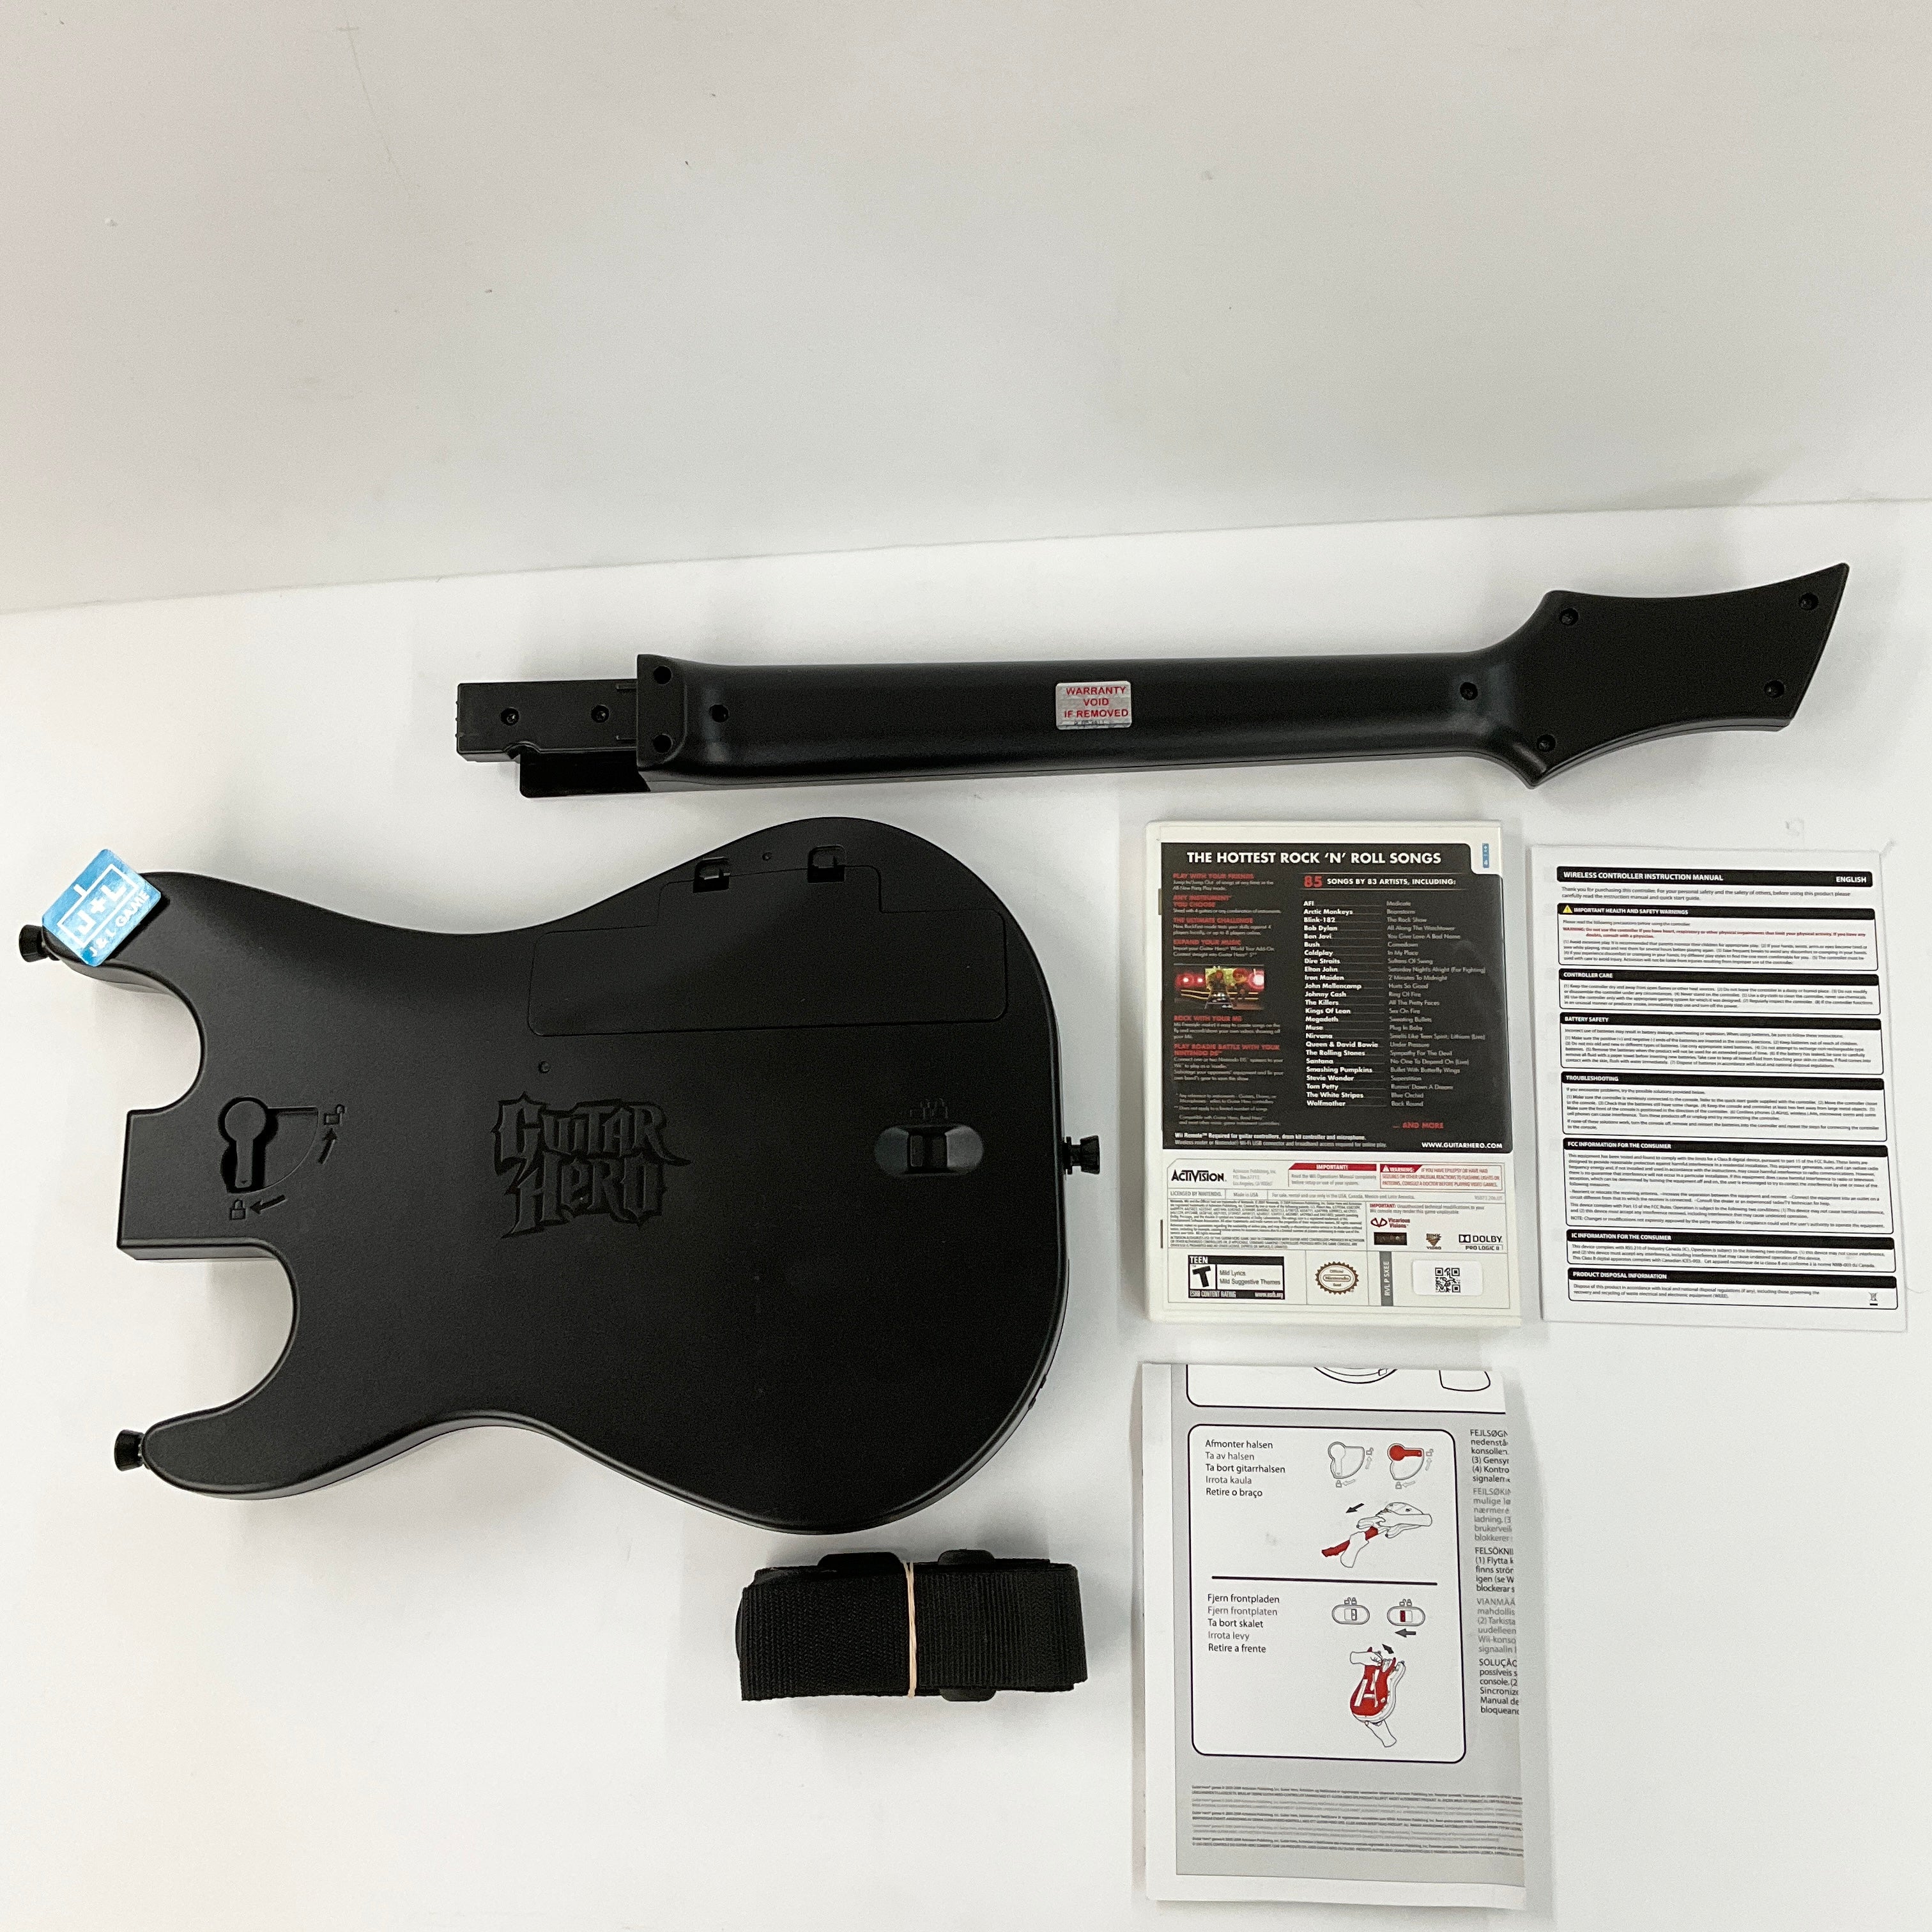 Nintendo Wii Guitar Hero 5 Guitar Kit - Nintendo Wii [Pre-Owned] Accessories ACTIVISION   